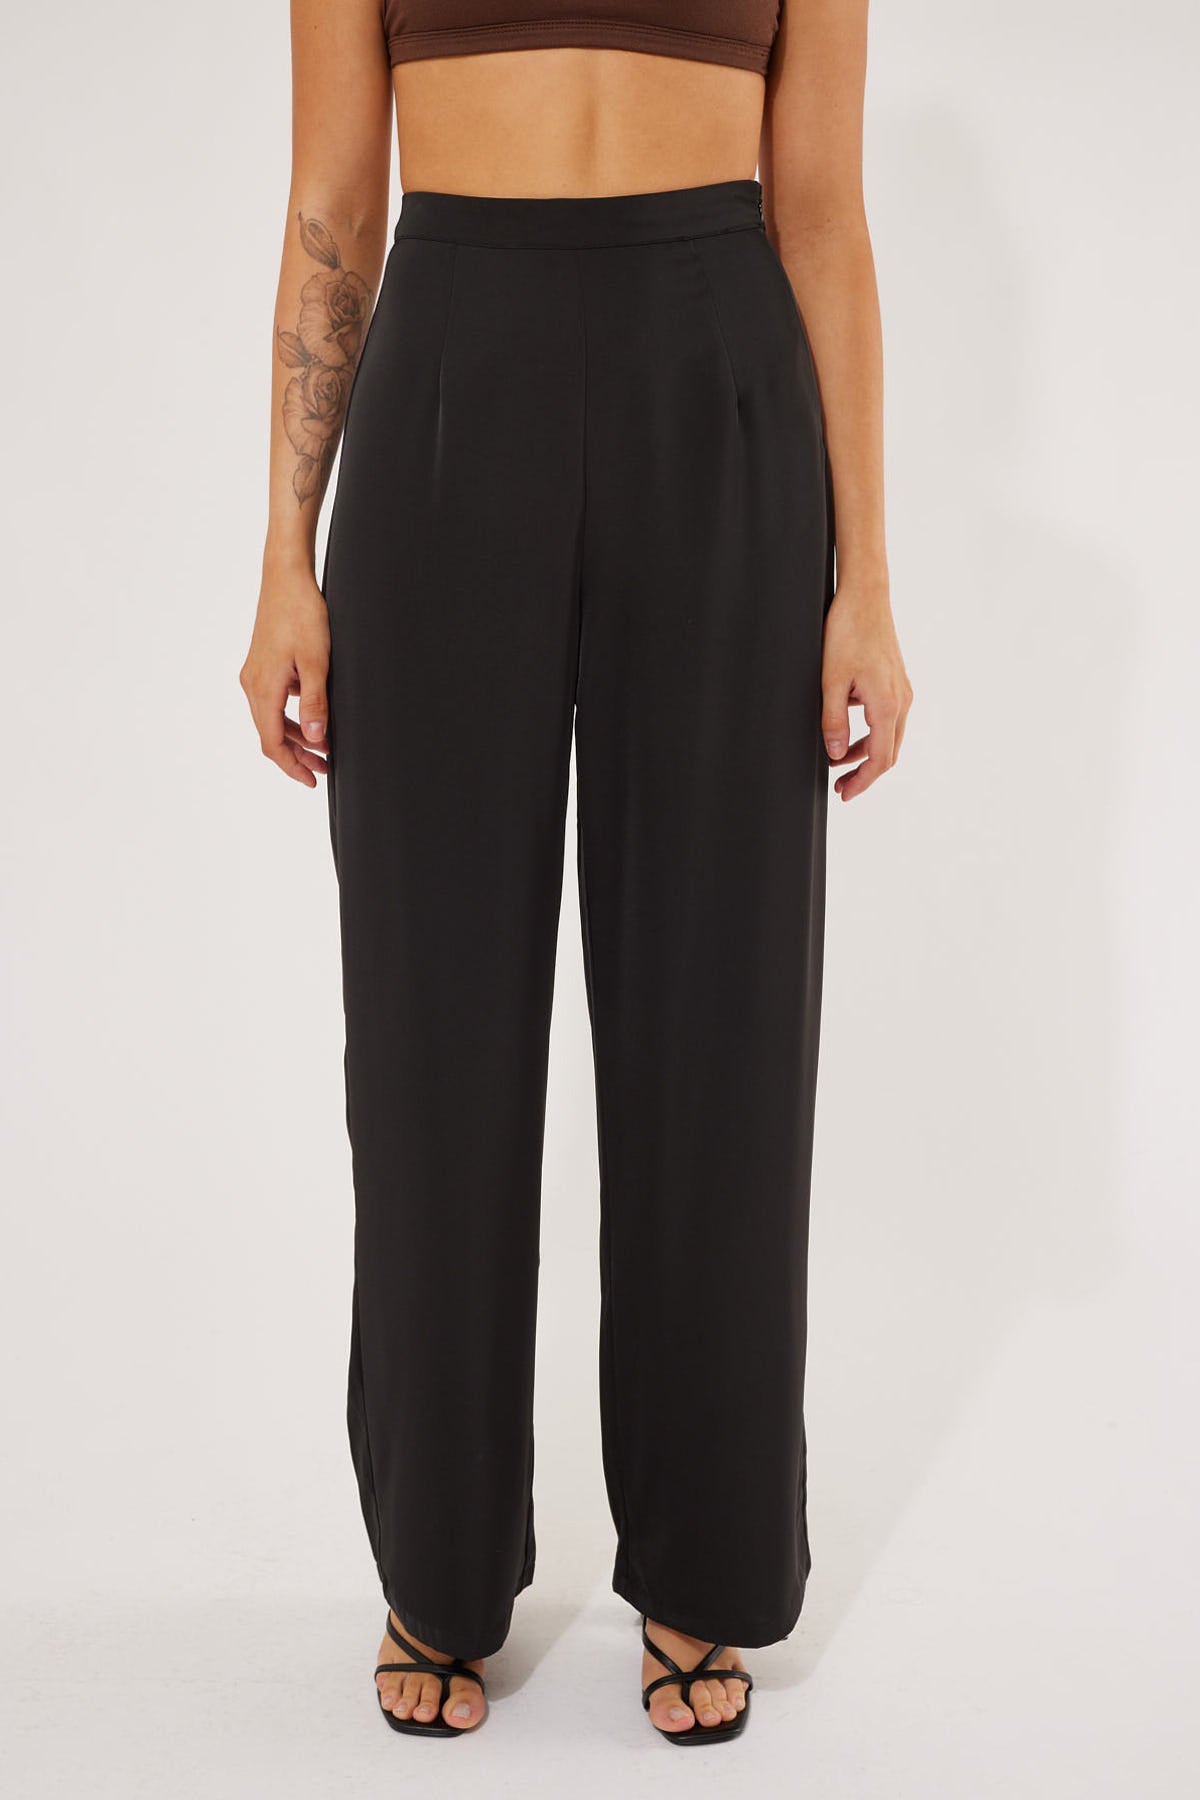 Luck & Trouble After Party Dressy Pant Black